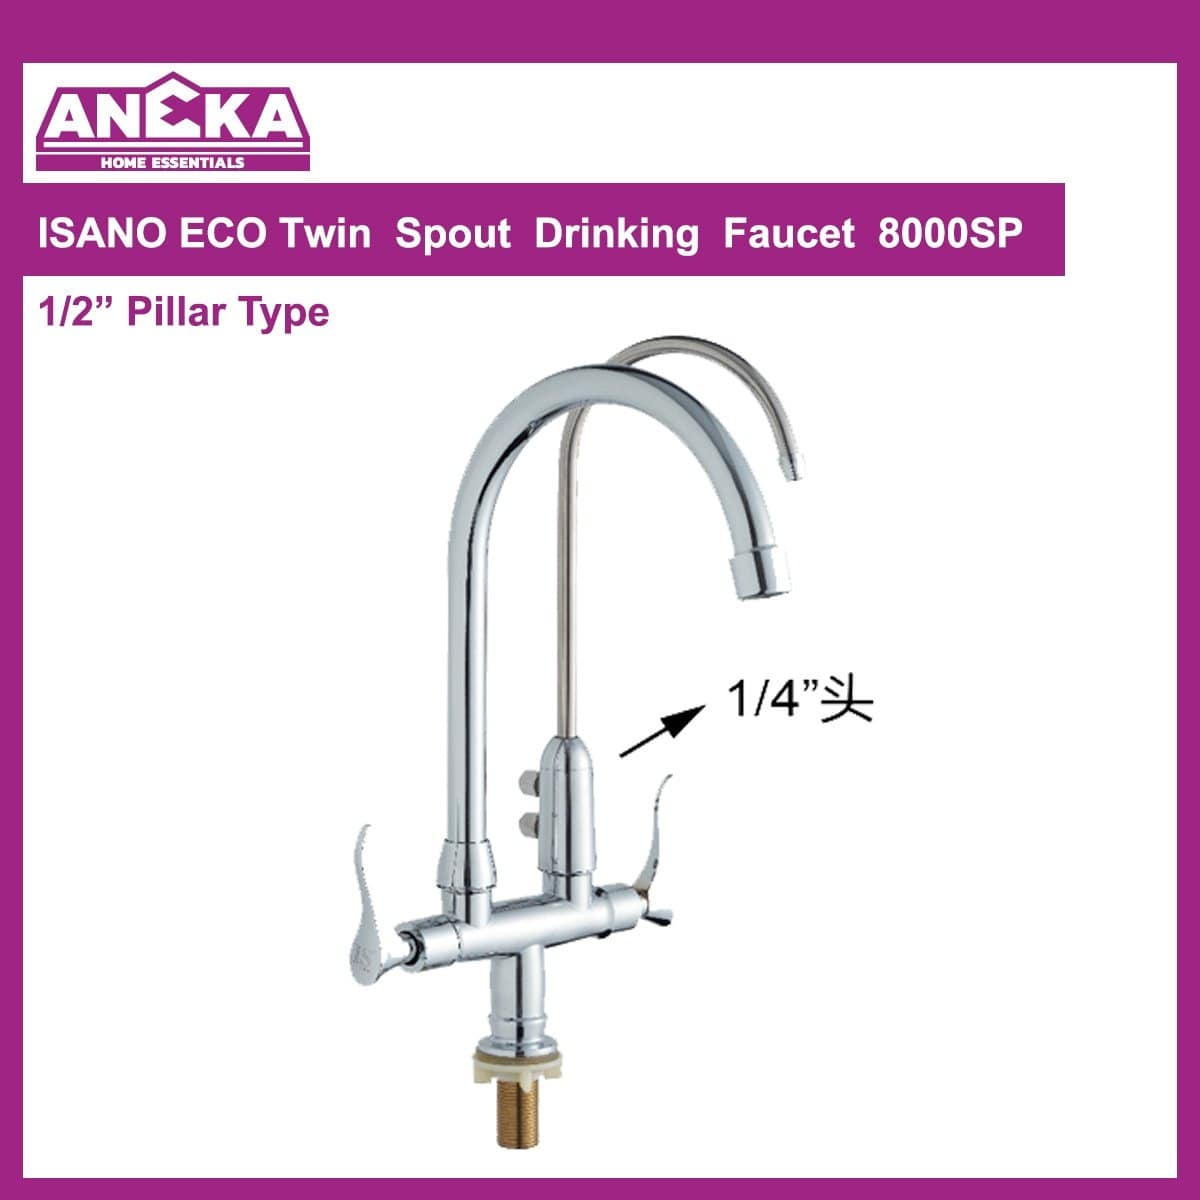 ISANO ECO Twin Spout Drinking Faucet 8000SP